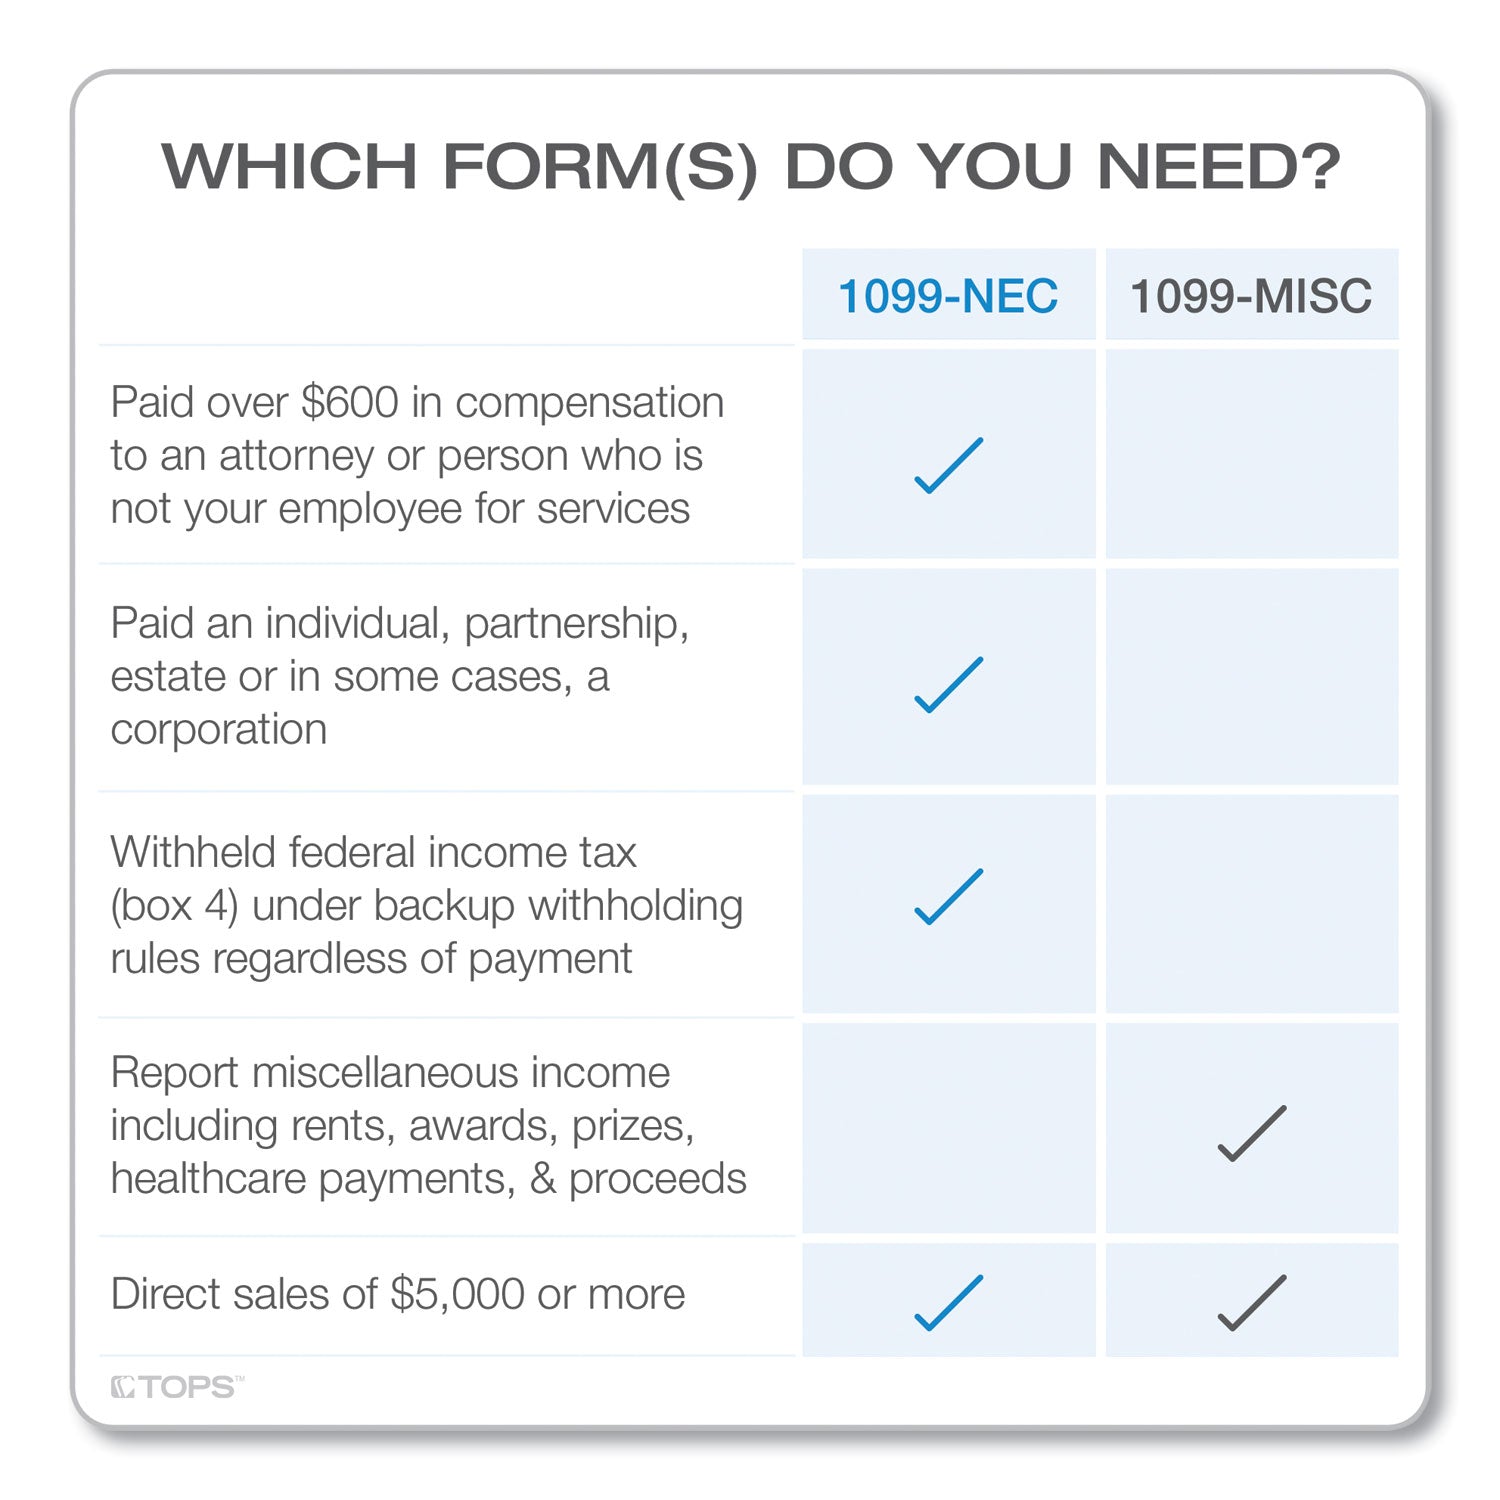 1099-nec-continuous-tax-forms-fiscal-year-2023-four-part-carbonless-85-x-55-2-forms-sheet-24-forms-total_top2299nec - 3